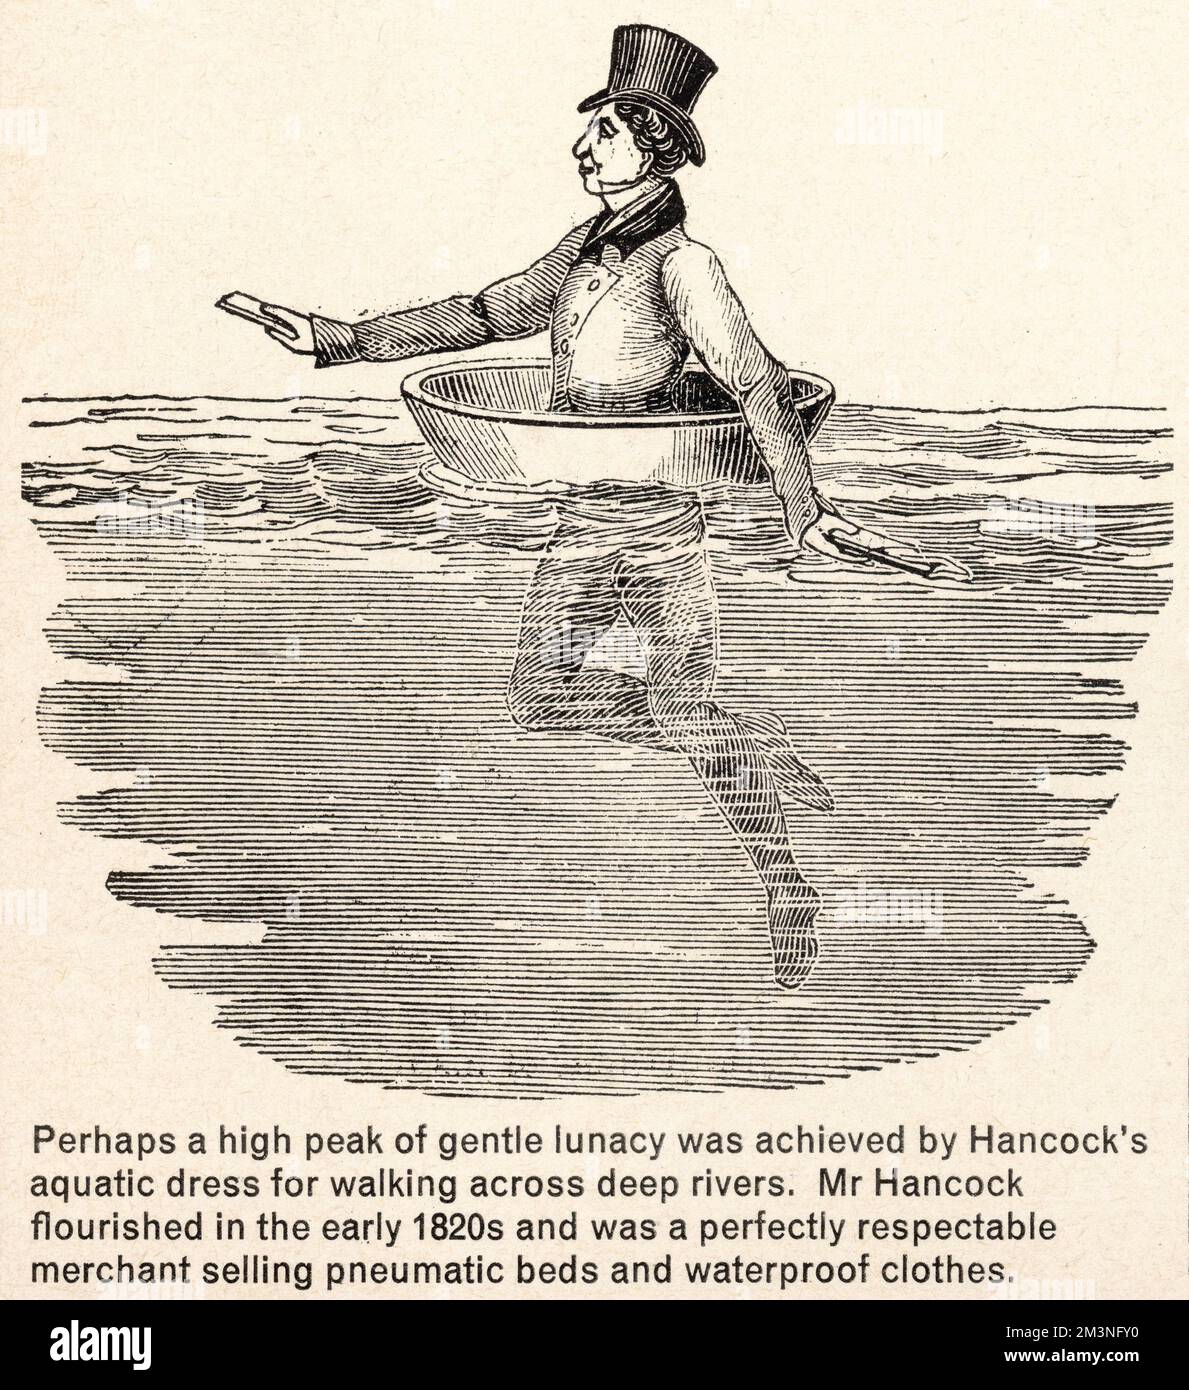 Hancock's Aquatic Dress - a basin-type device for 'walking' across deep rivers. The rather 'opn' design rathers opens the possibility for flooding, but Mr Hancock's business flourished in the early 1820s and he was a perfectly repectable merchant selling pneumatic beds and waterproof clothes!  late 19th century Stock Photo